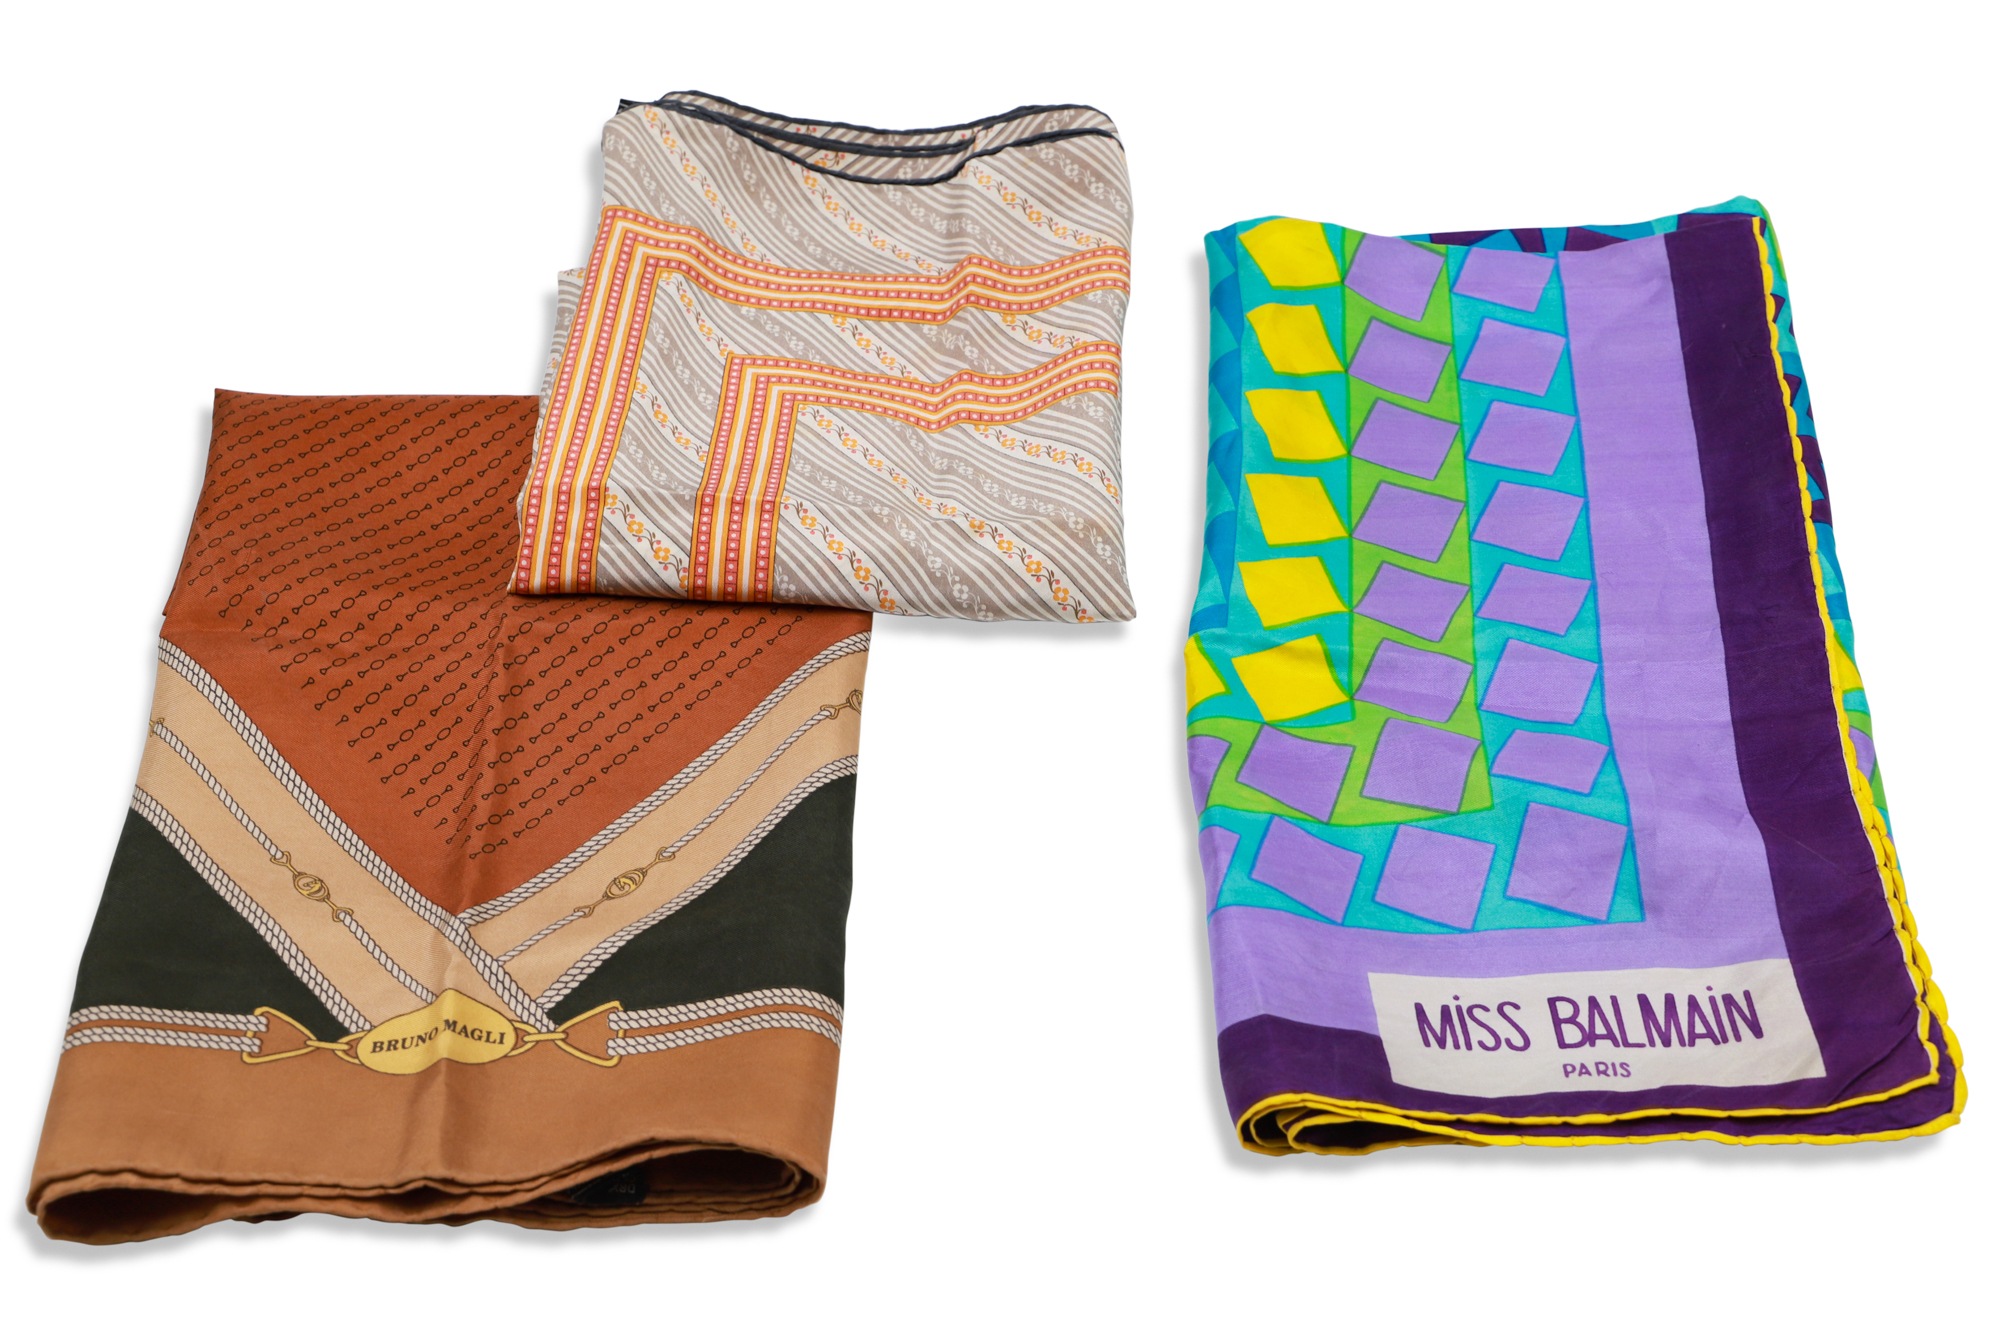 TWO BRUNO MAGLI SILK SCARVES, together with a Miss Balmain scarf